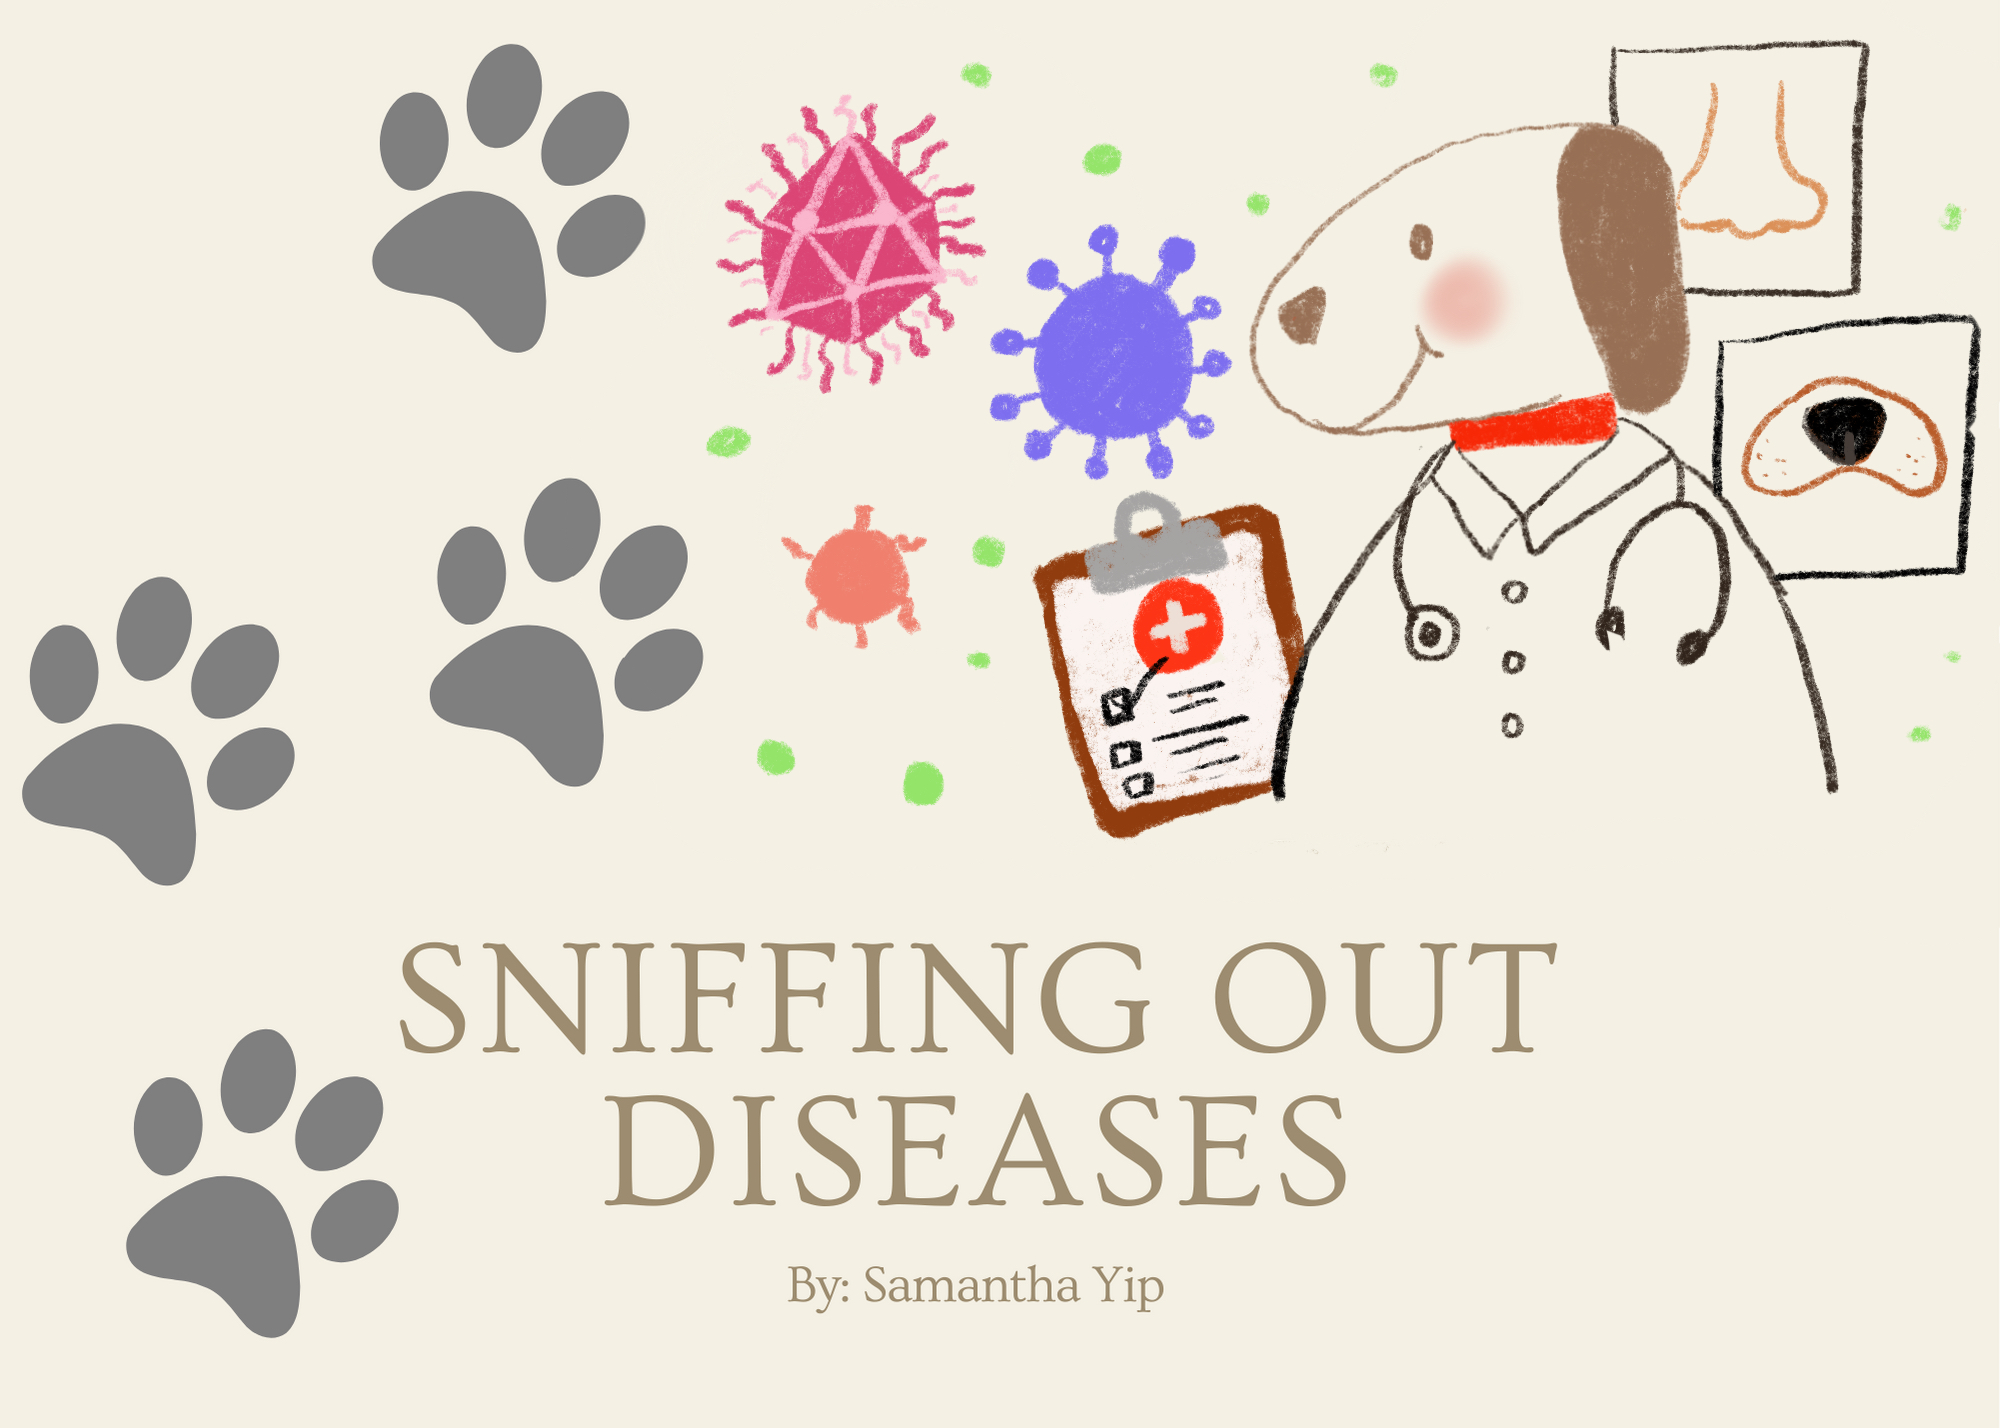 Sniffing Out Diseases